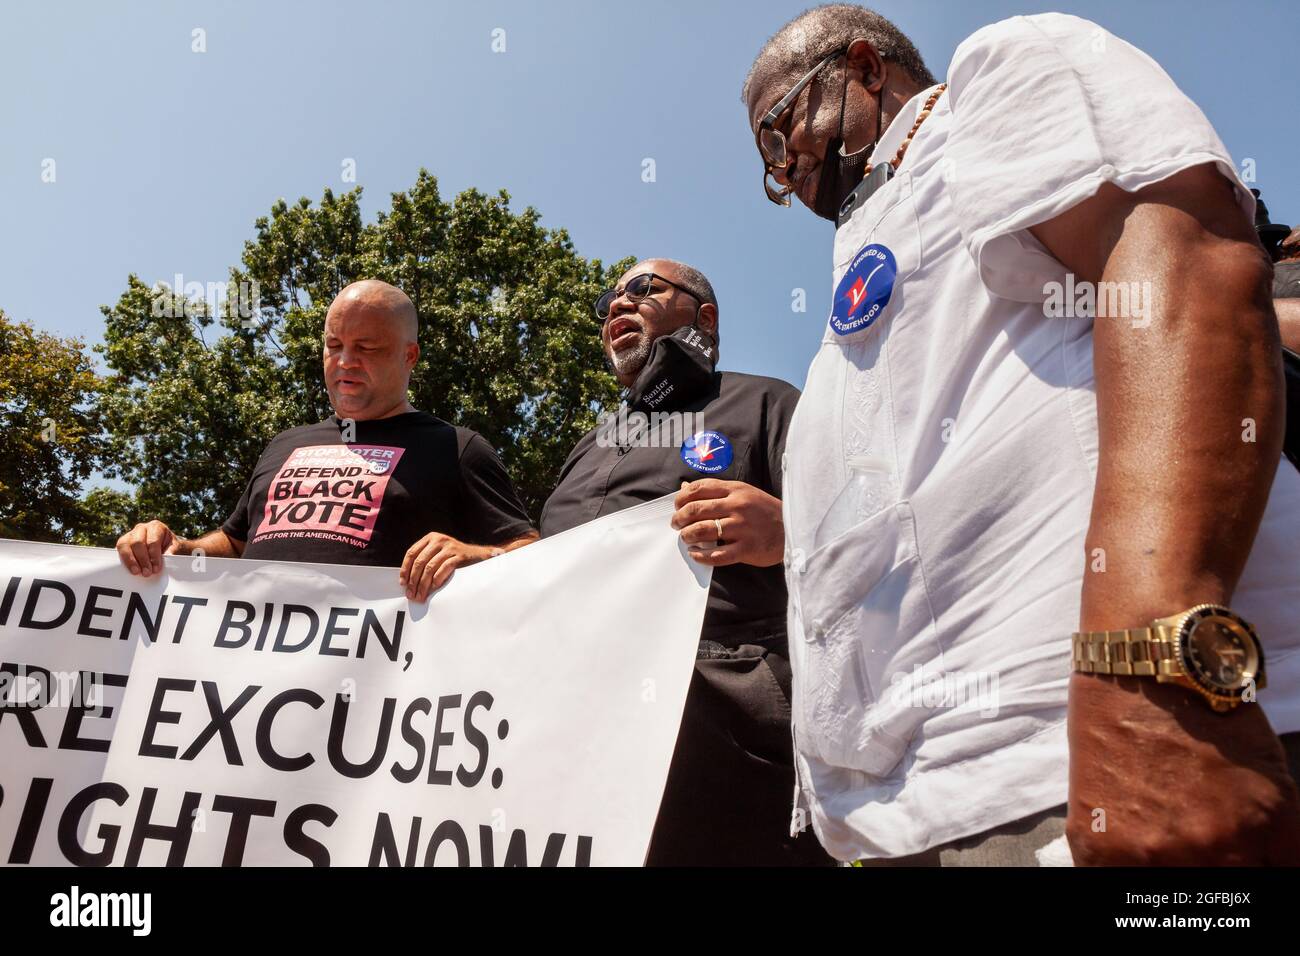 Washington, DC, USA, 24 August, 2021.  Pictured: Protesters join Rev. Melvin Wilson in prayer at the conclusion of a rally and civil disobedience action at the White House.  The League of Women Voters, People for the American Way, Black Voters Matter, and many other organizations hosted the rally to urge President Biden to protect voting rights after many states have passed laws to make voting more difficult for minorities.  Credit: Allison Bailey / Alamy Live News Stock Photo